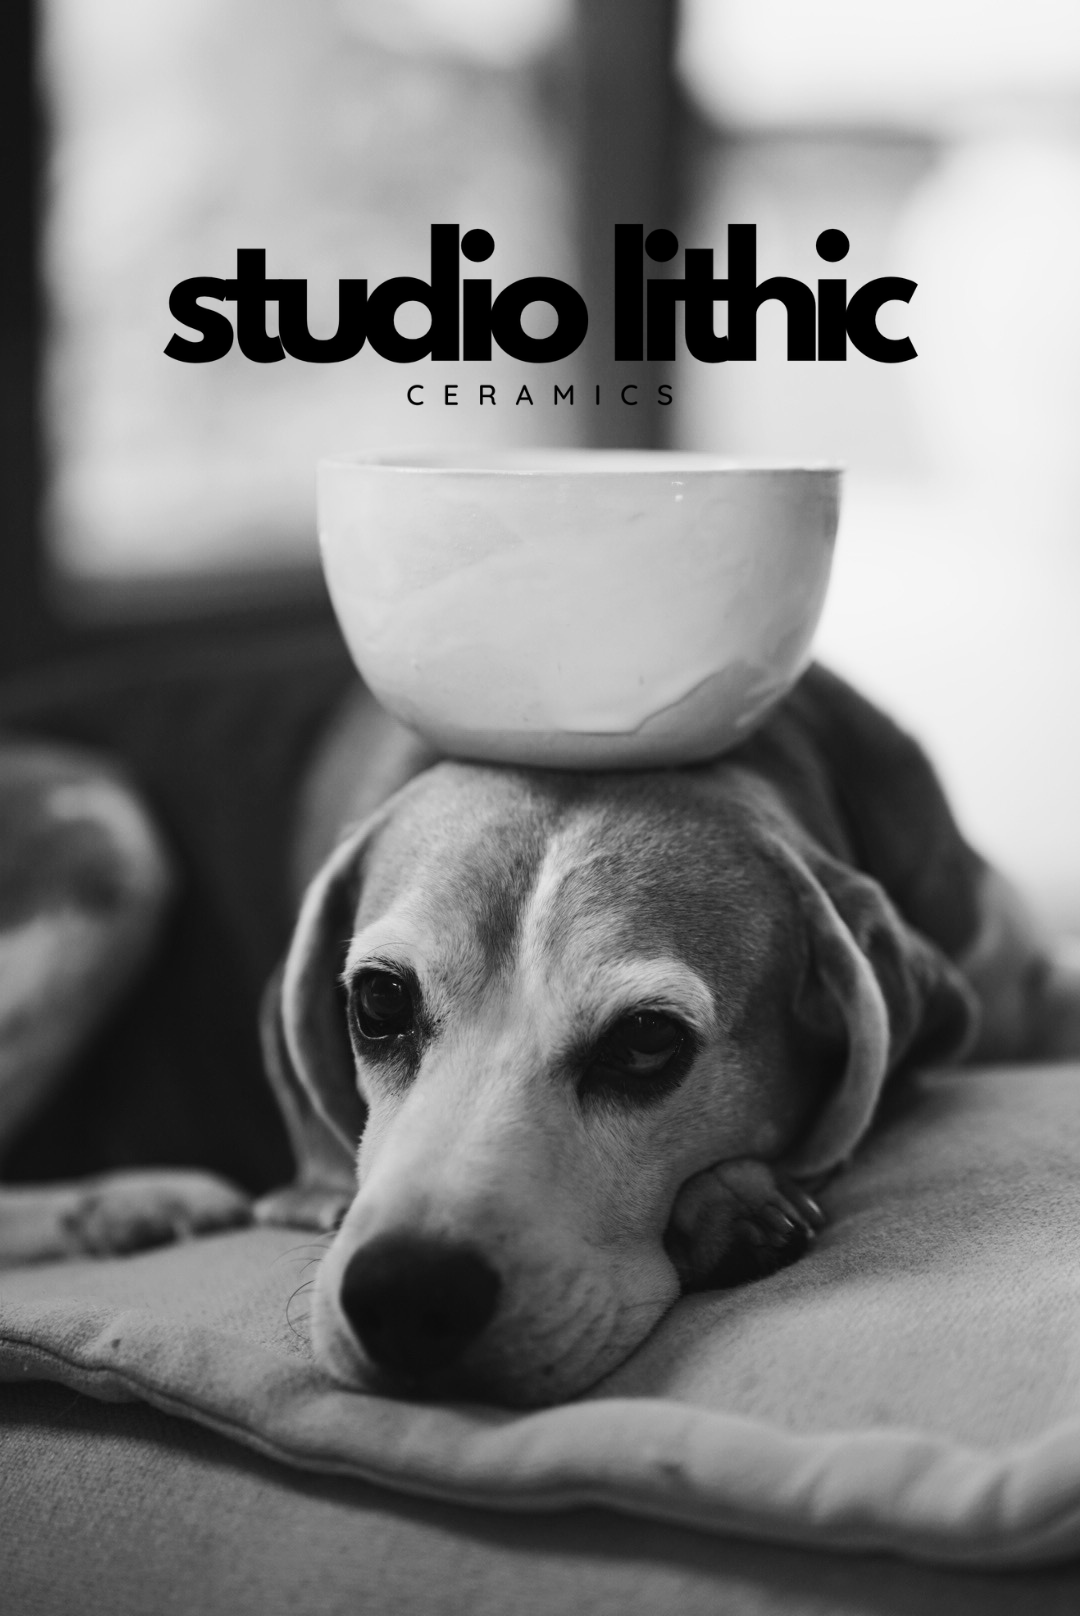 Black and white image of a beagle dog with a ceramic bowl on its head and a text logo overlay. 